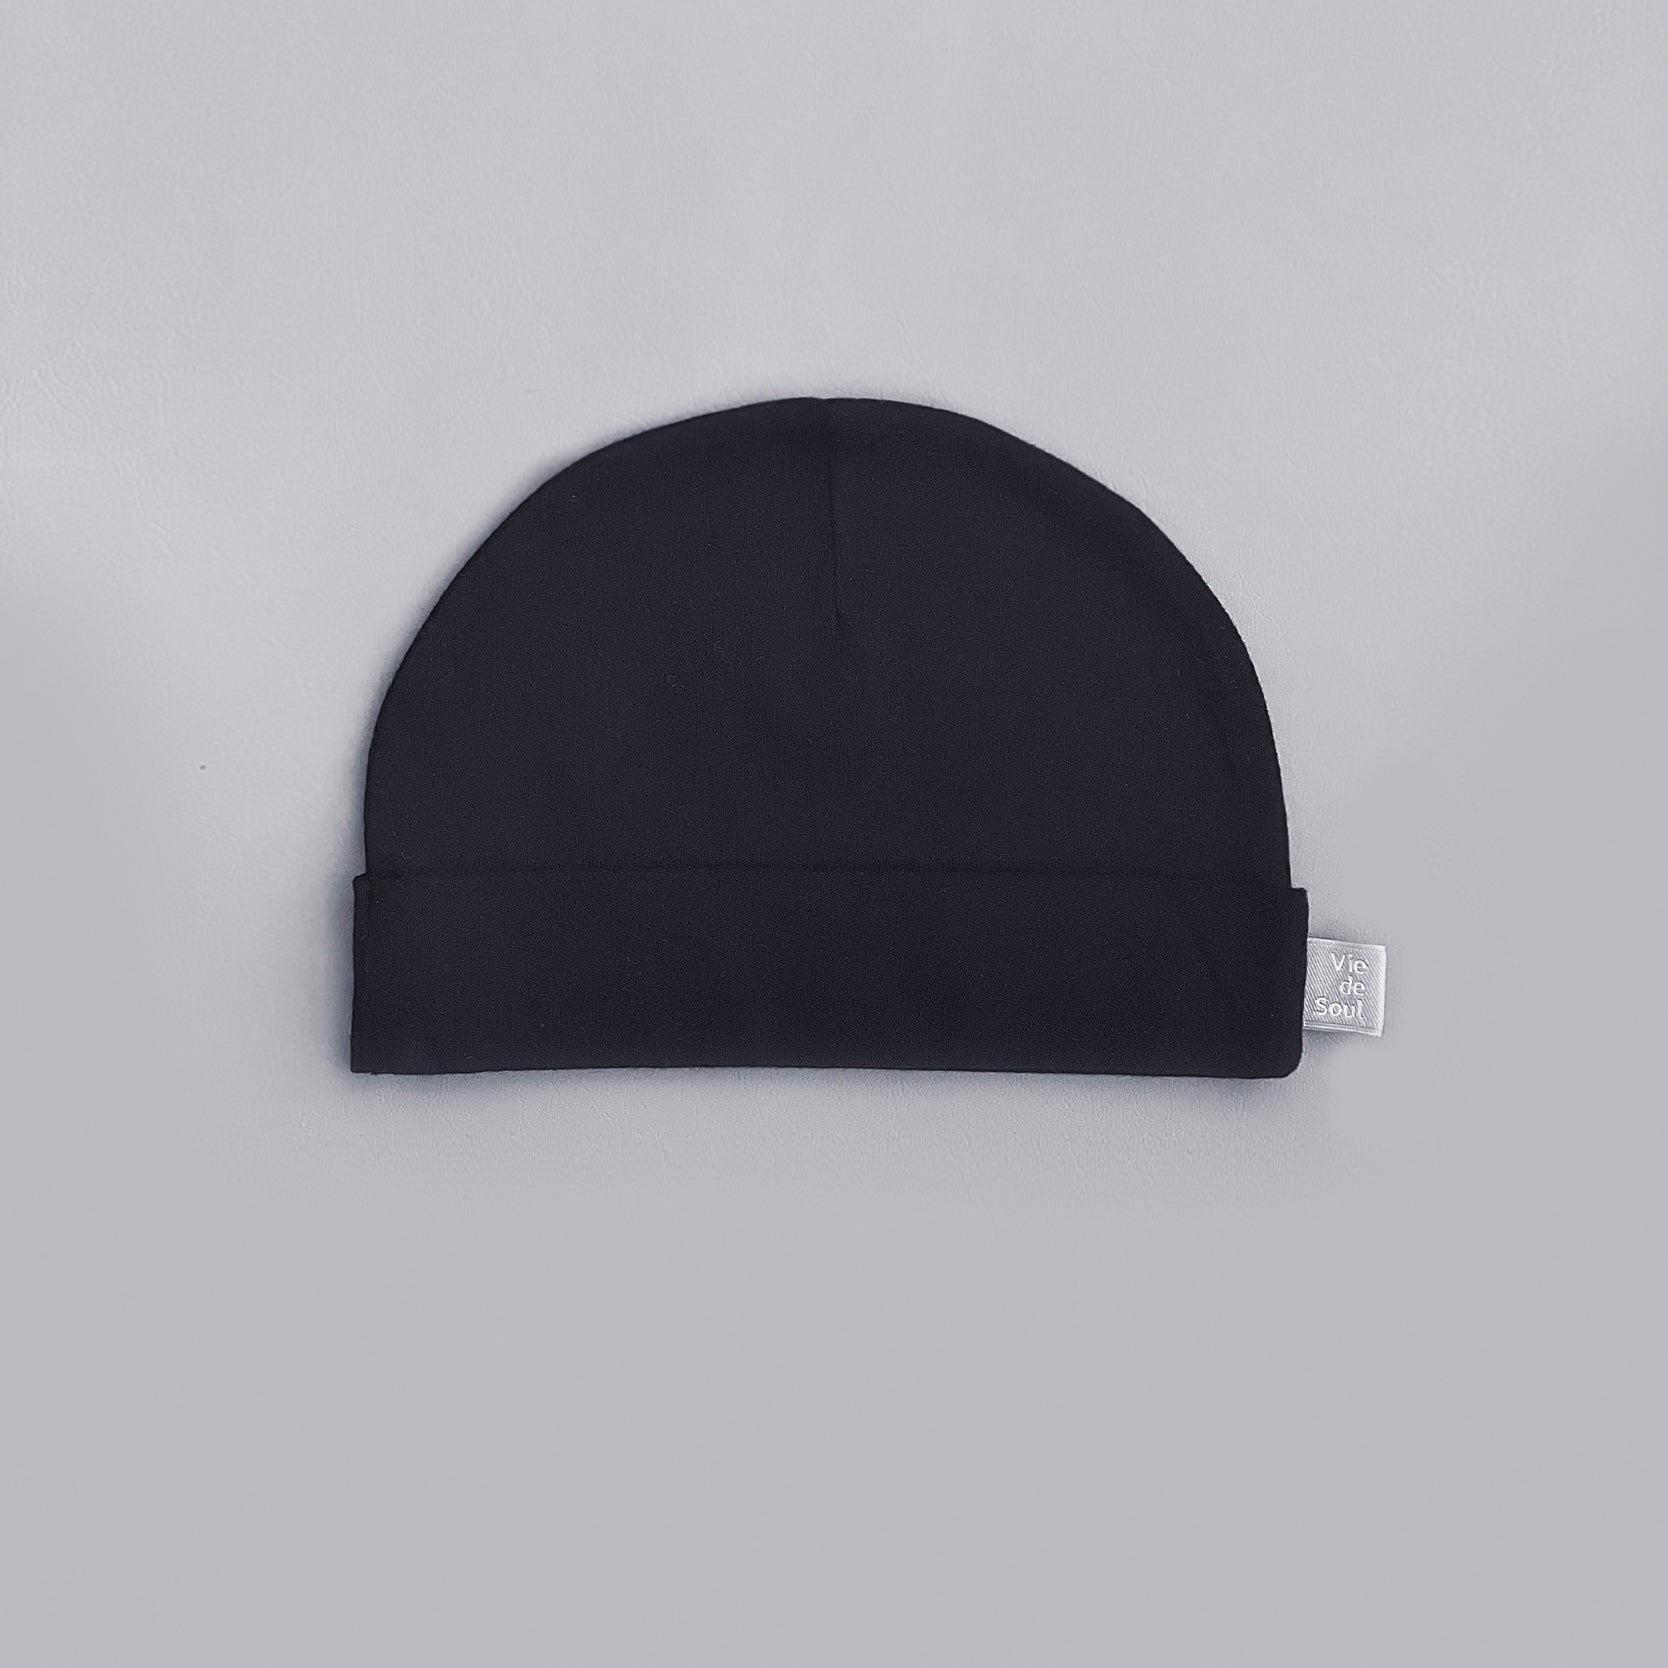 Leon Beanie (Black): Lightweight and wrinkle-free bonnet hat, essential for controlling baby's body temperature.